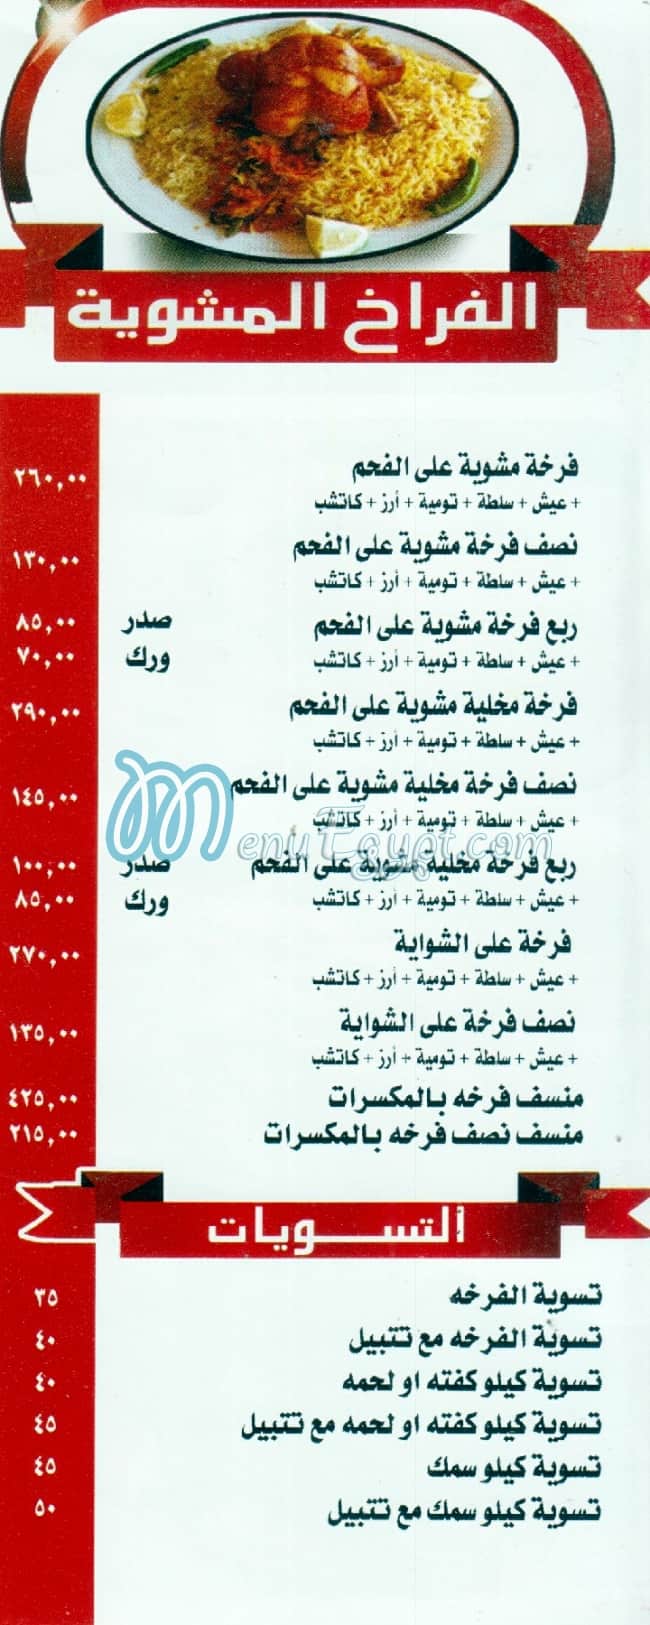 Abou Hussein Elsoury delivery menu